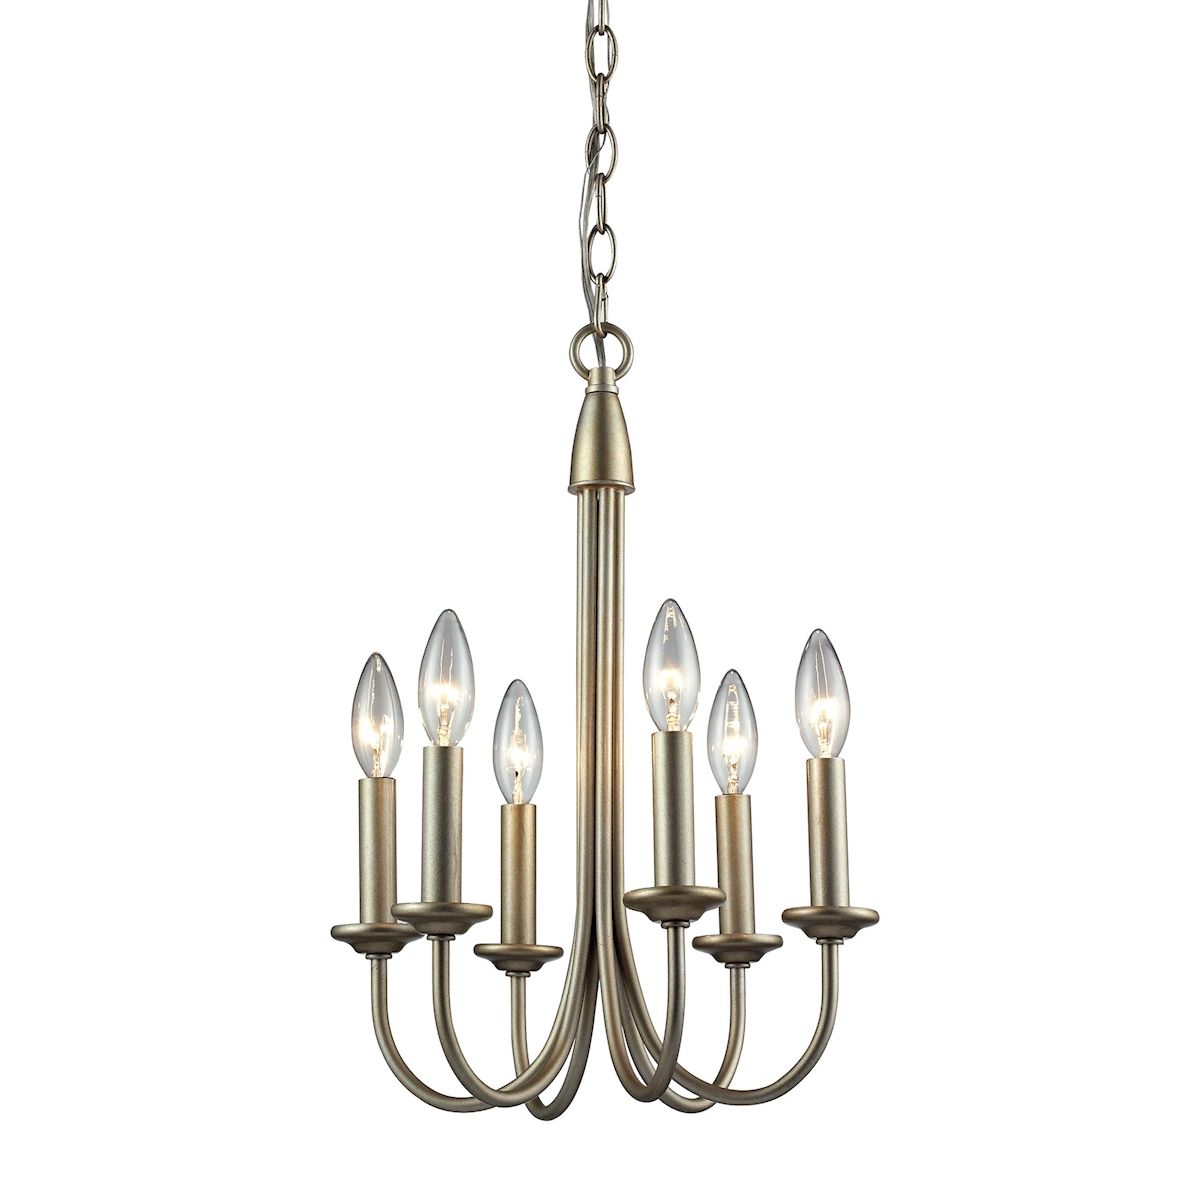 Chandette 6 Light Chandelier In Aged Silver | Ebay With Ornament Aged Silver Chandeliers (View 13 of 15)